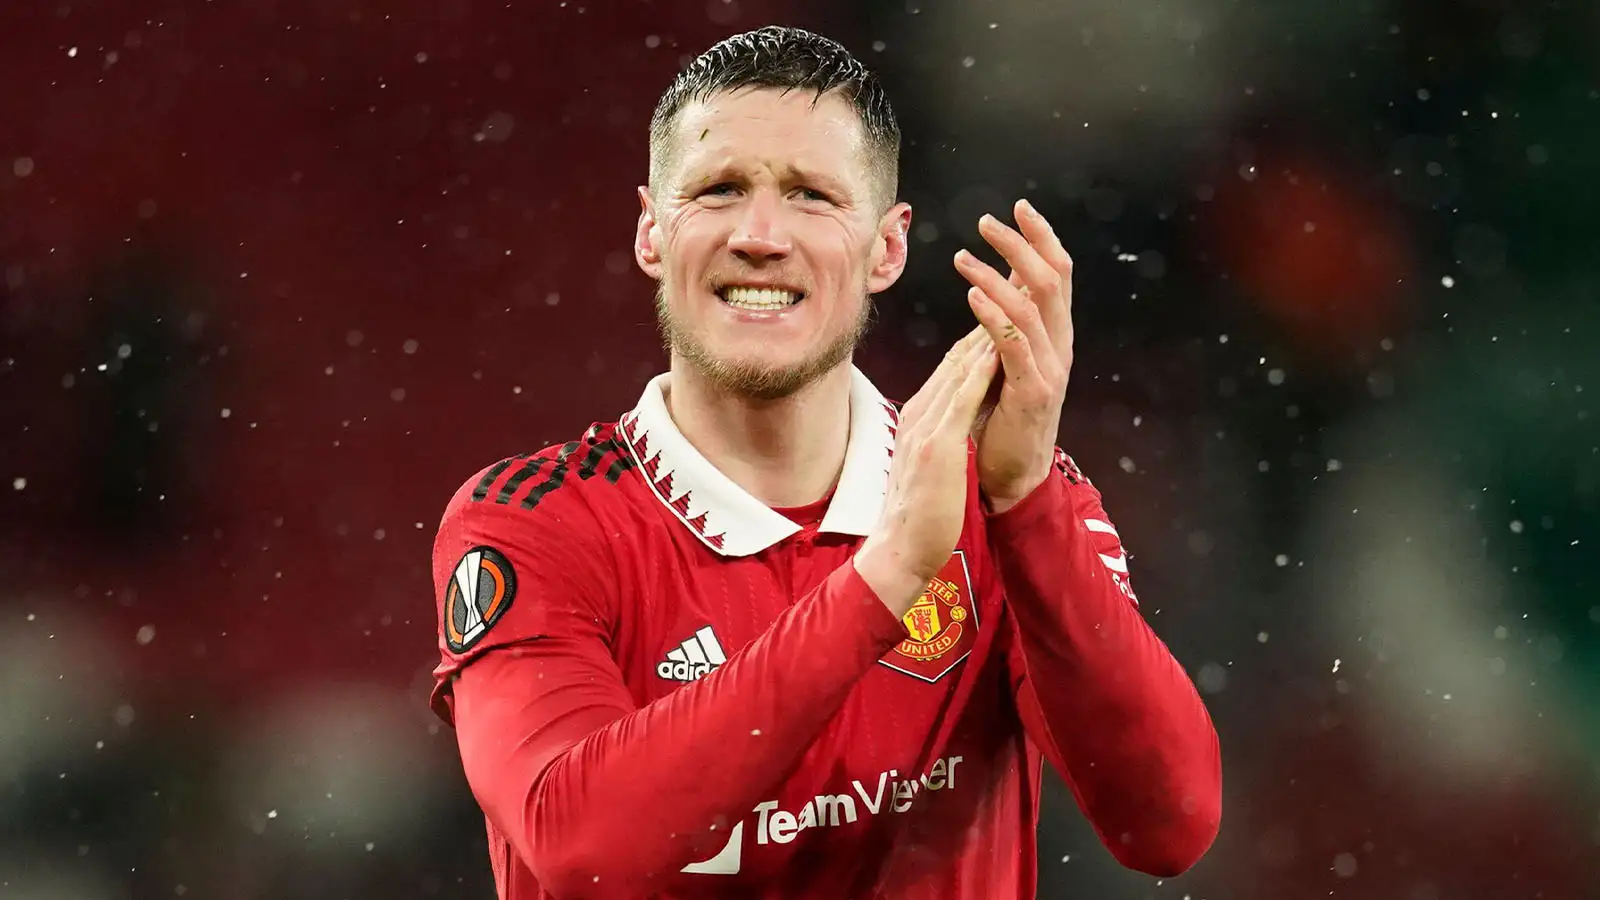 “I love Wout Weghorst” 7 of the best quotes on Man Utd’s frontman